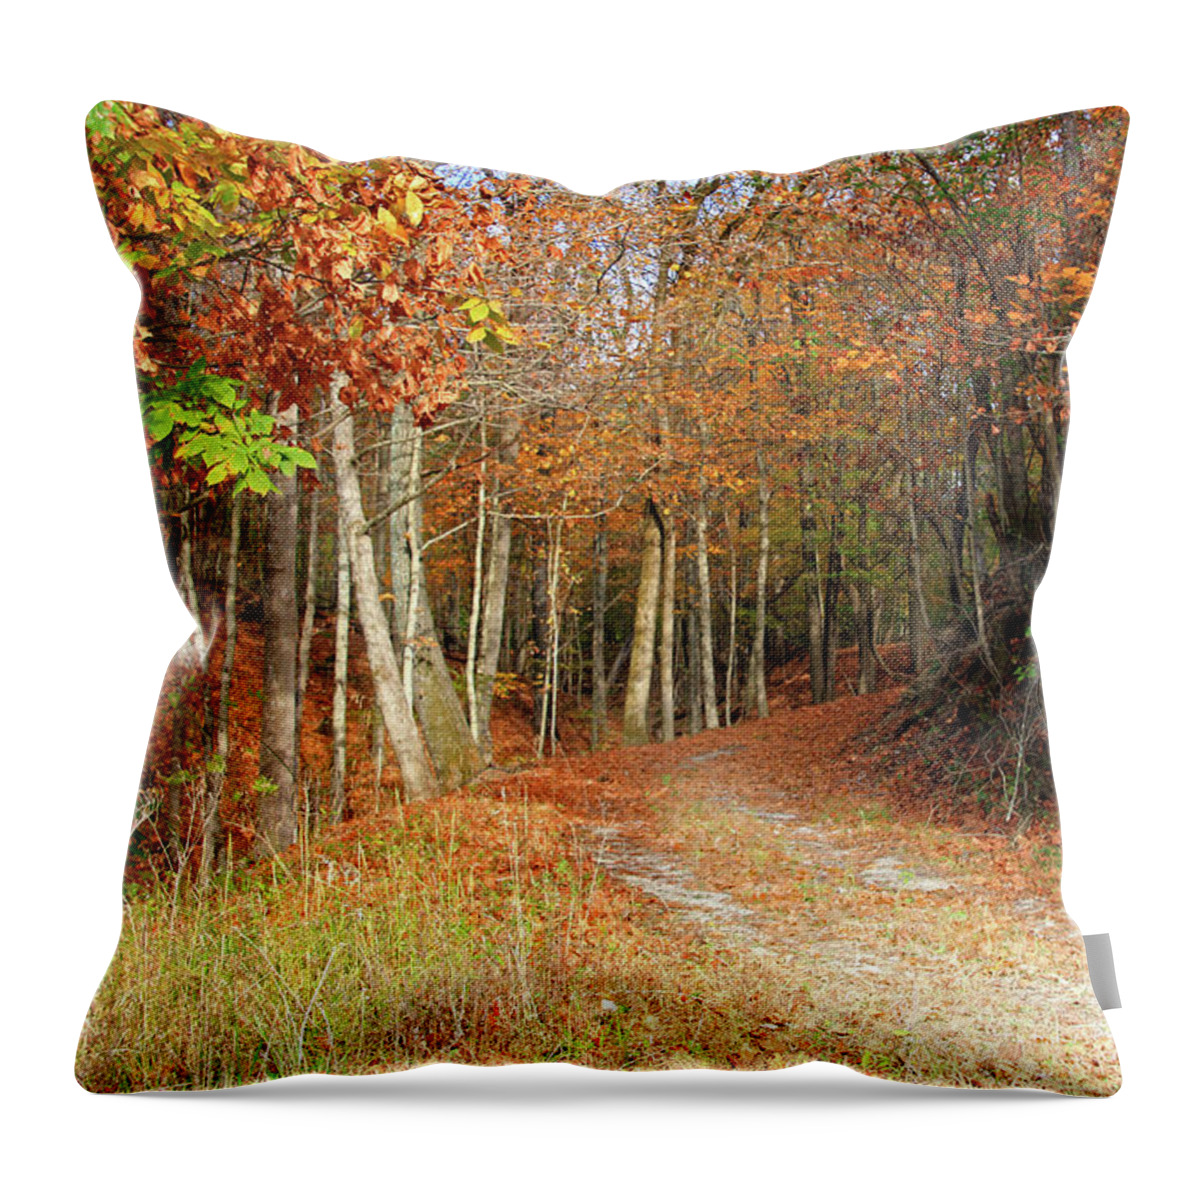 Fall Leaves On Path Throw Pillow featuring the photograph Fall Leaves on Path by Angela Murdock